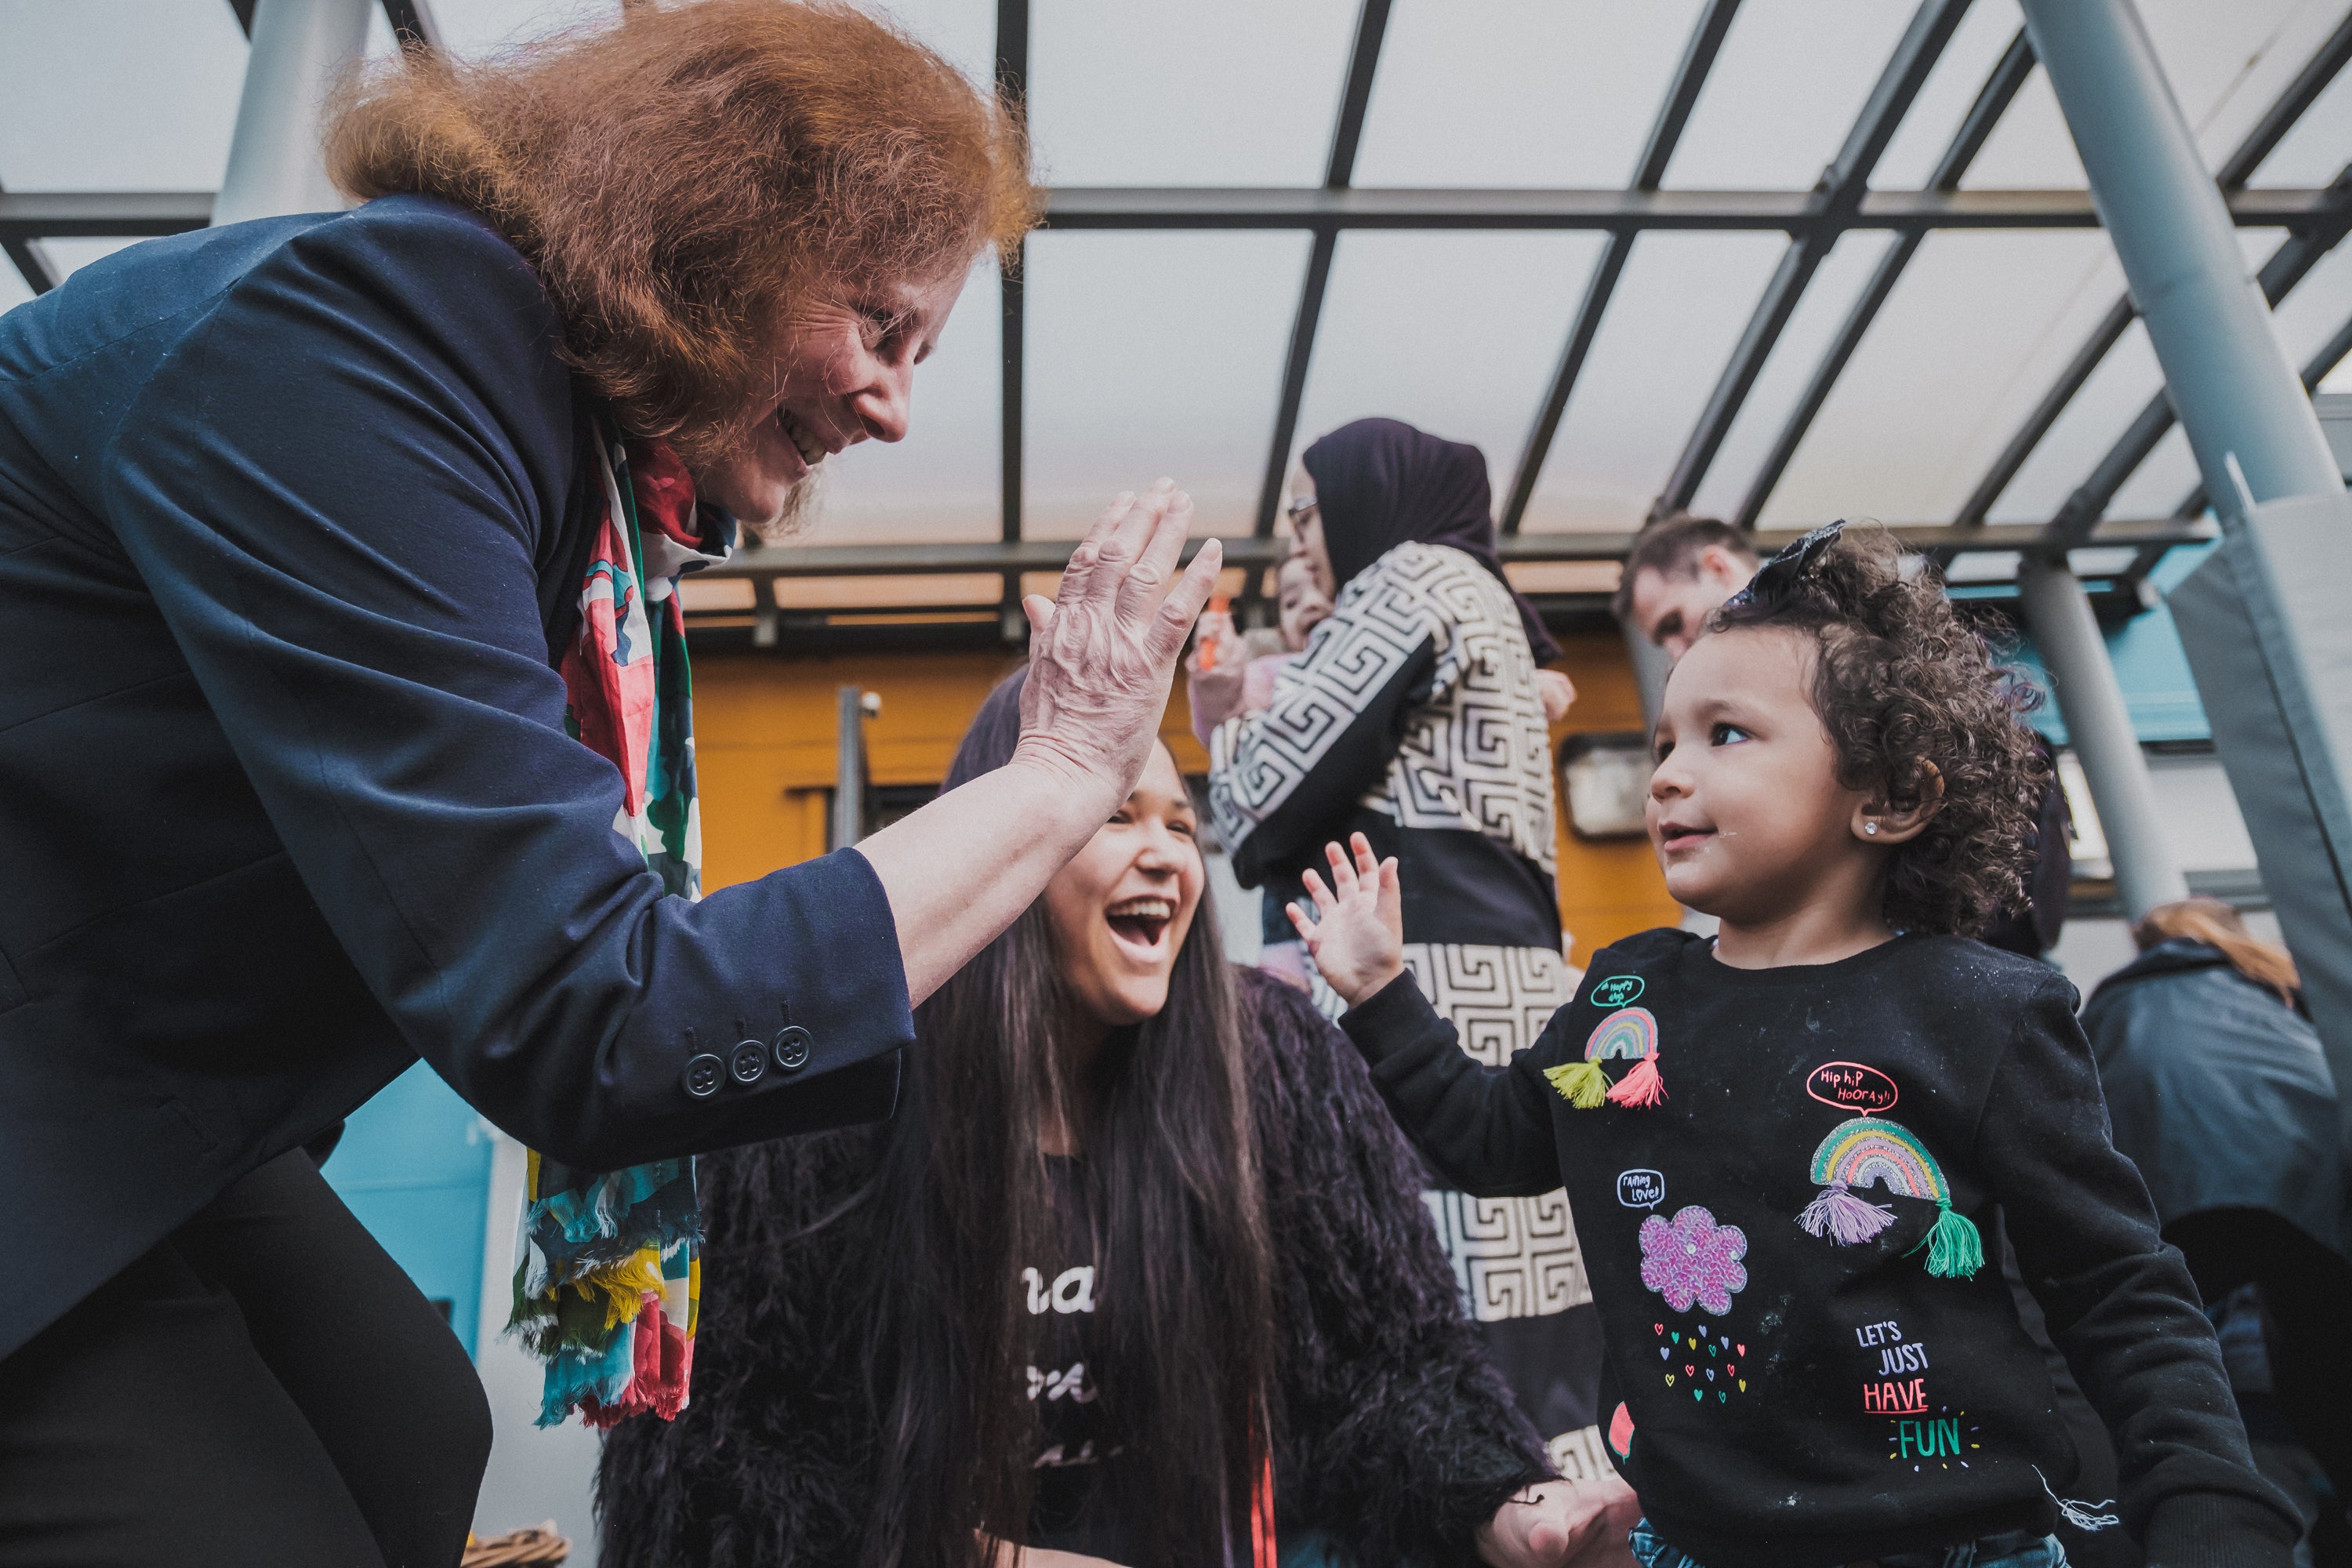 Deputy minister for social services Julie Morgan high-fives a child in celebration of the new law banning the physical punishment of children (Welsh Government handout/PA)